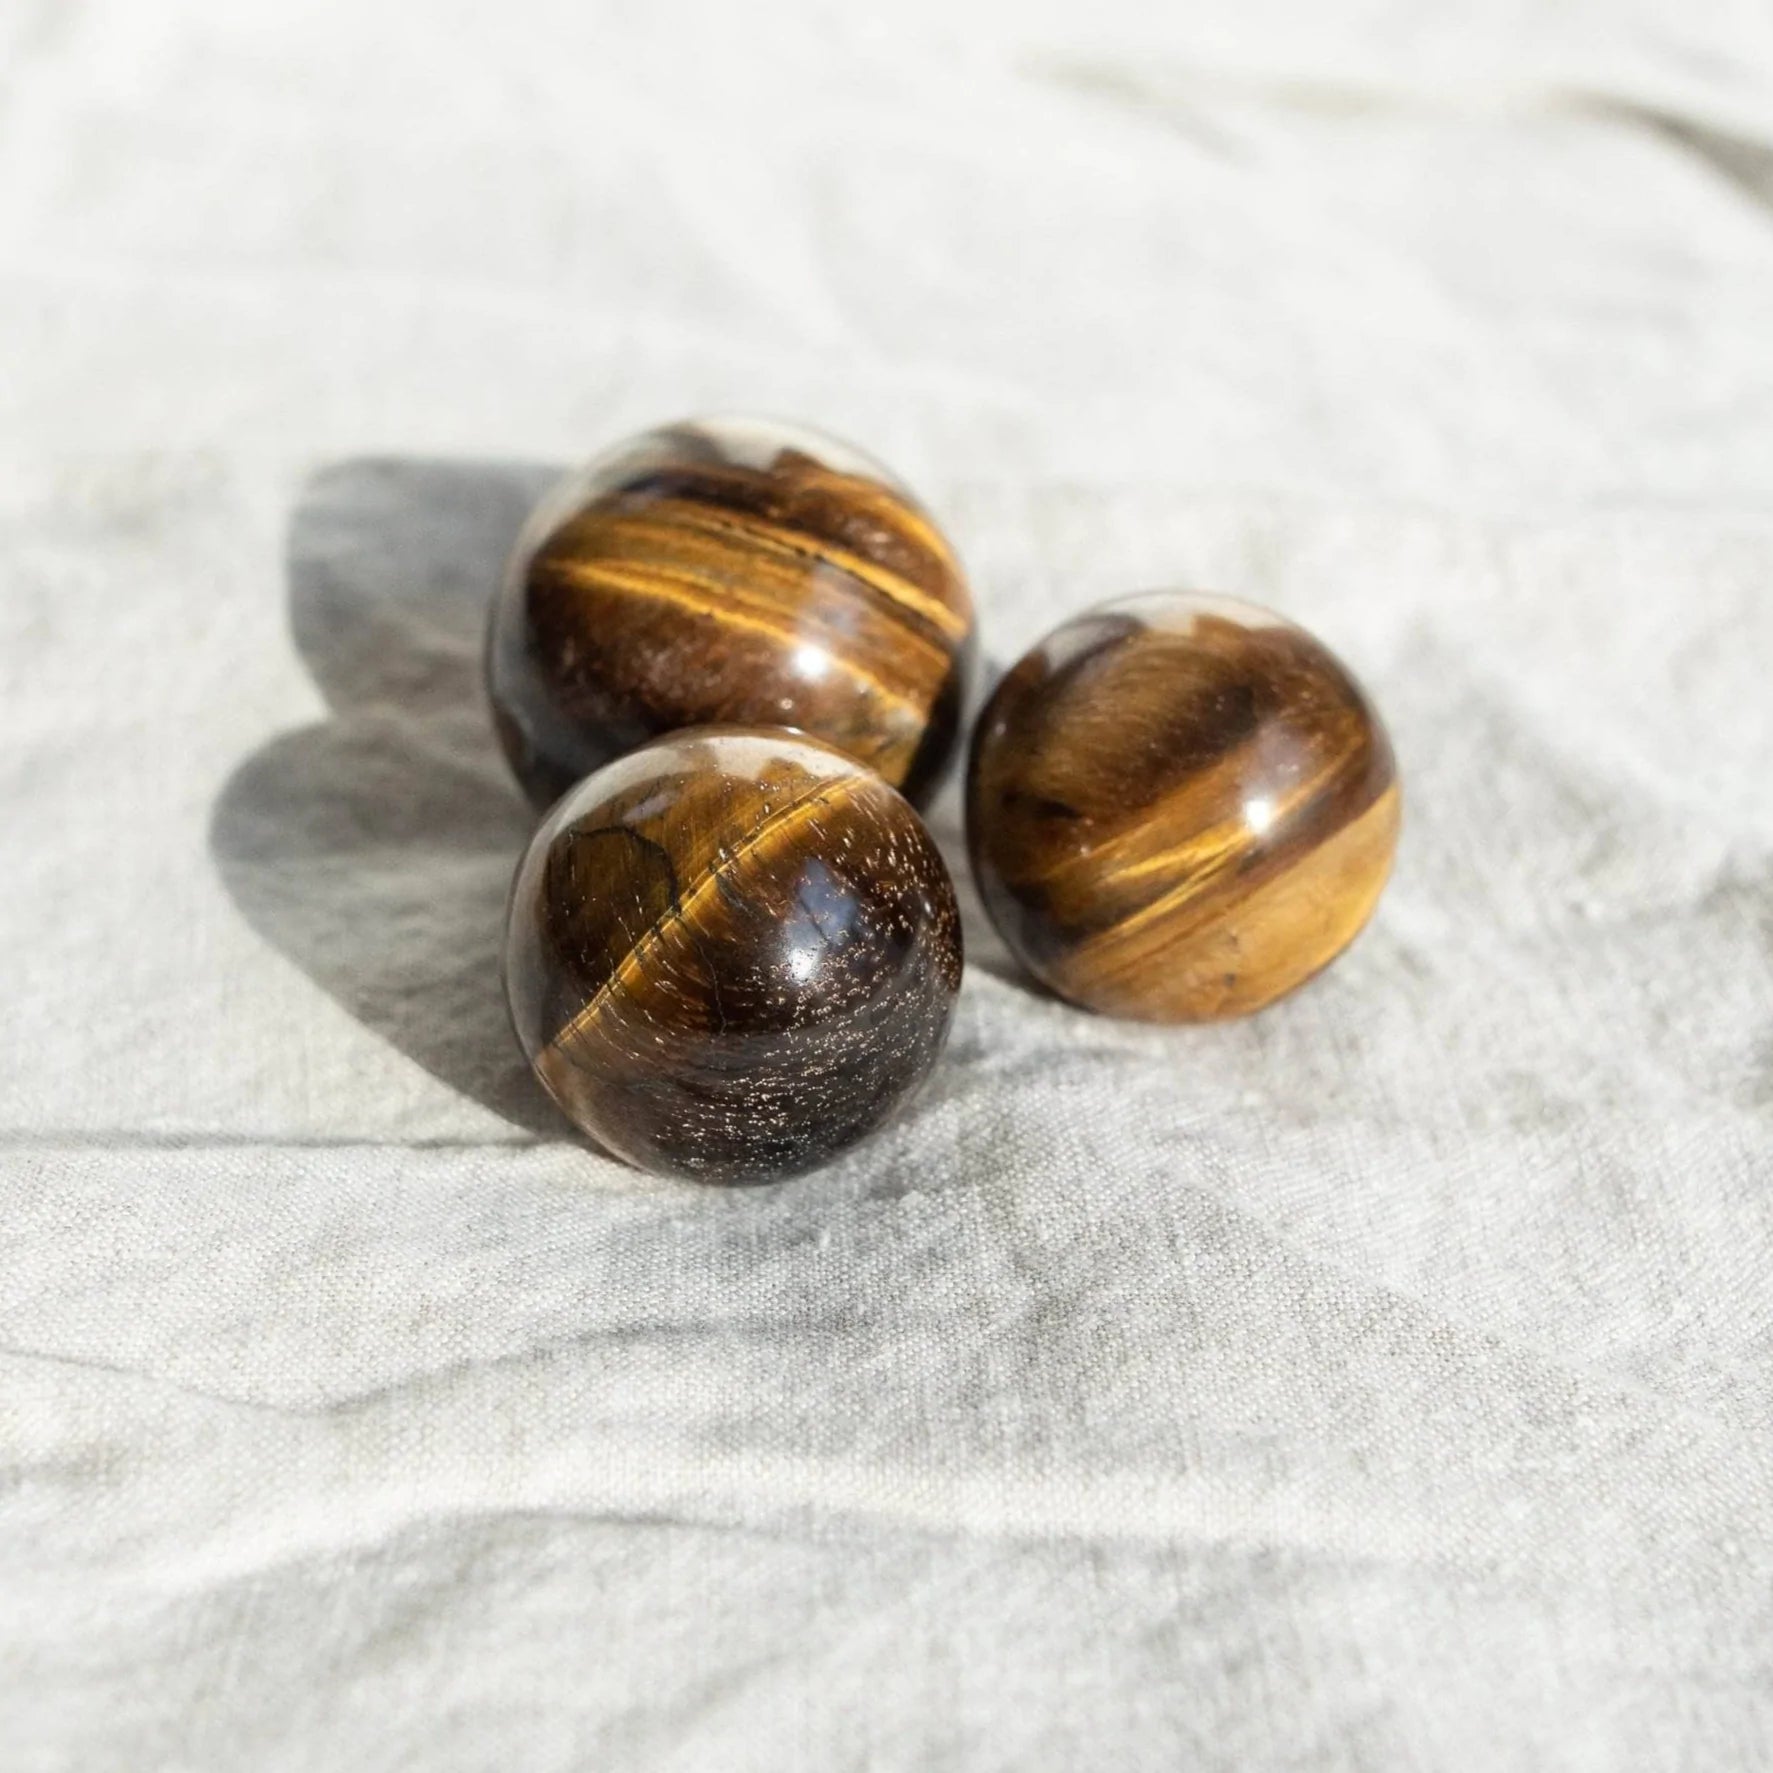  Tiger Eye Sphere by Tiny Rituals Tiny Rituals Perfumarie